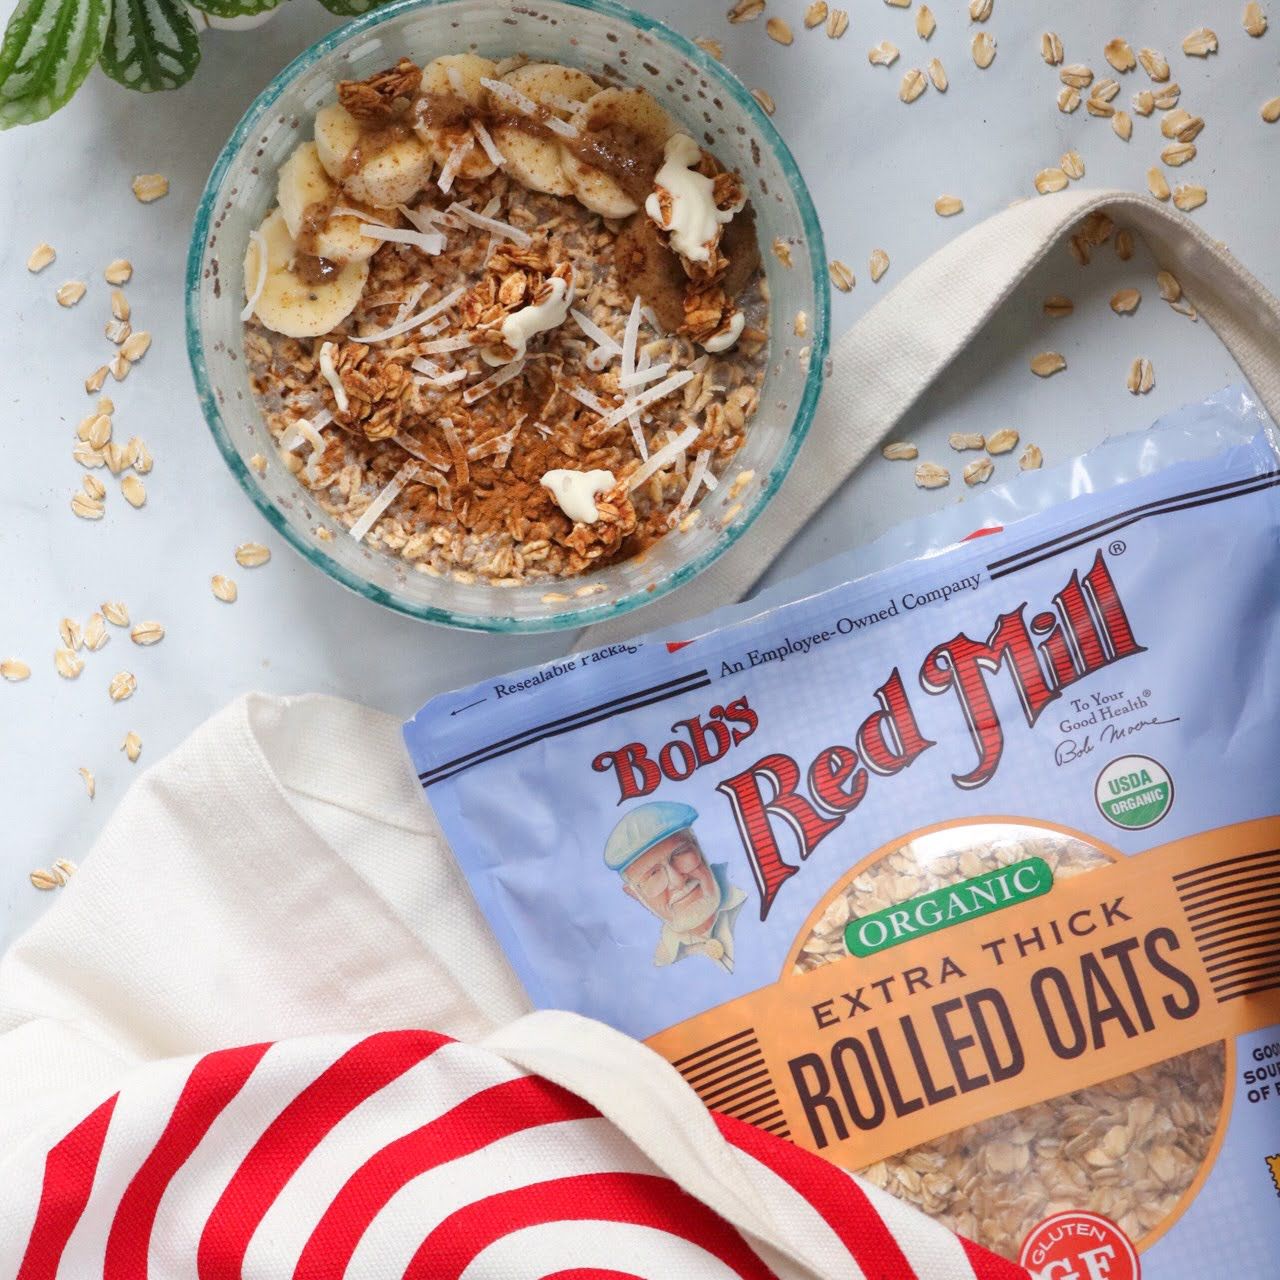 Promoted Bob's Red Mill Gluten-Free oats at Target